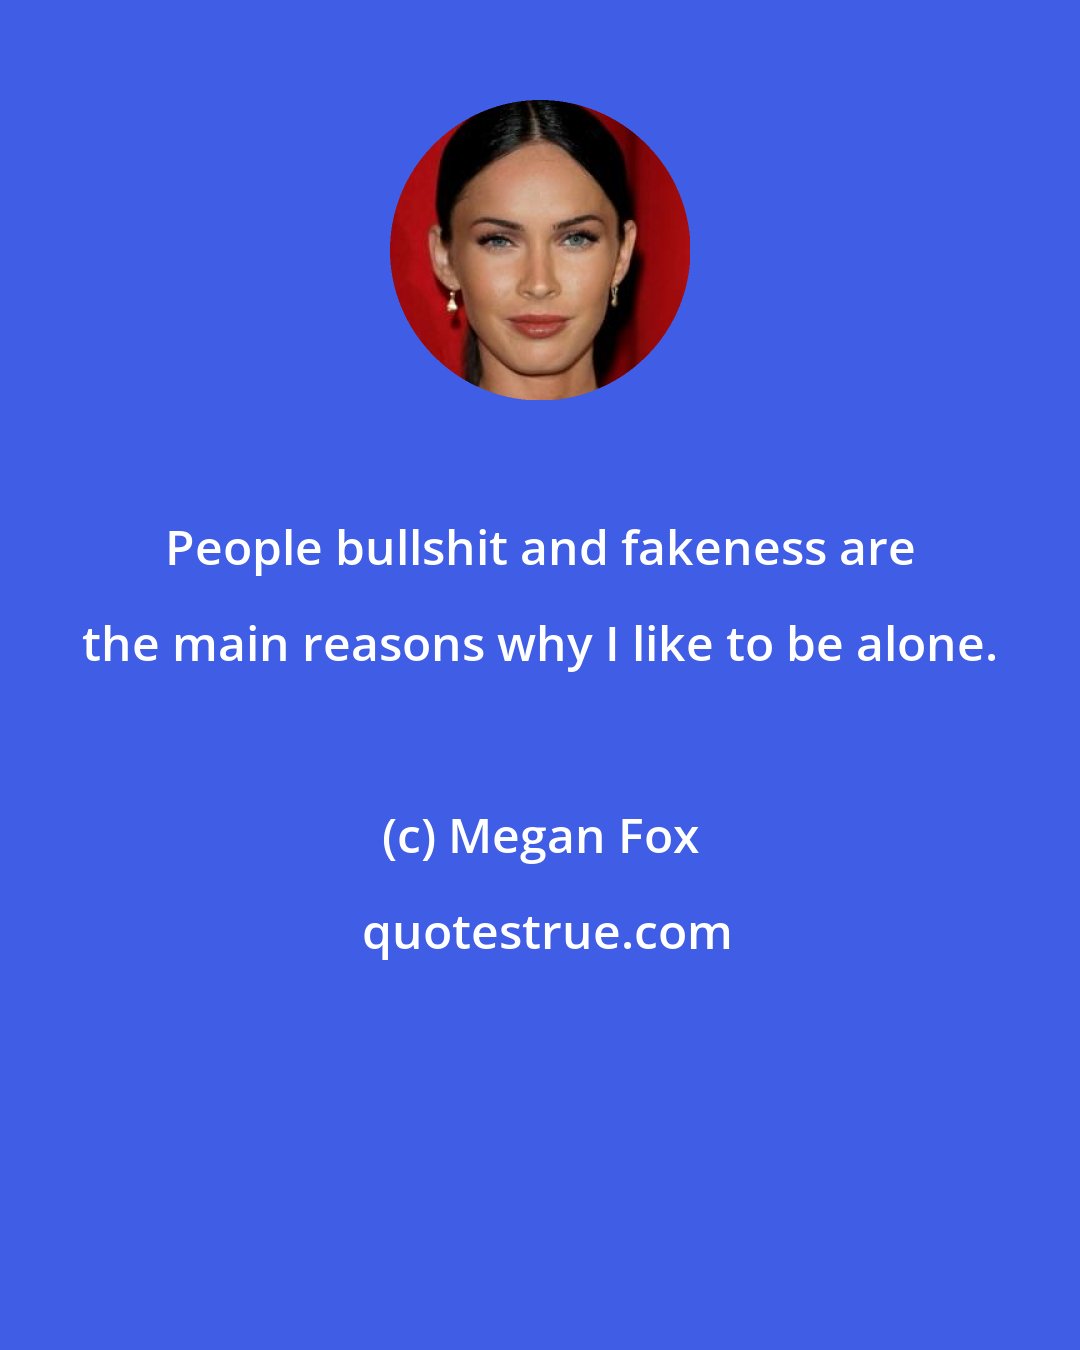 Megan Fox: People bullshit and fakeness are the main reasons why I like to be alone.